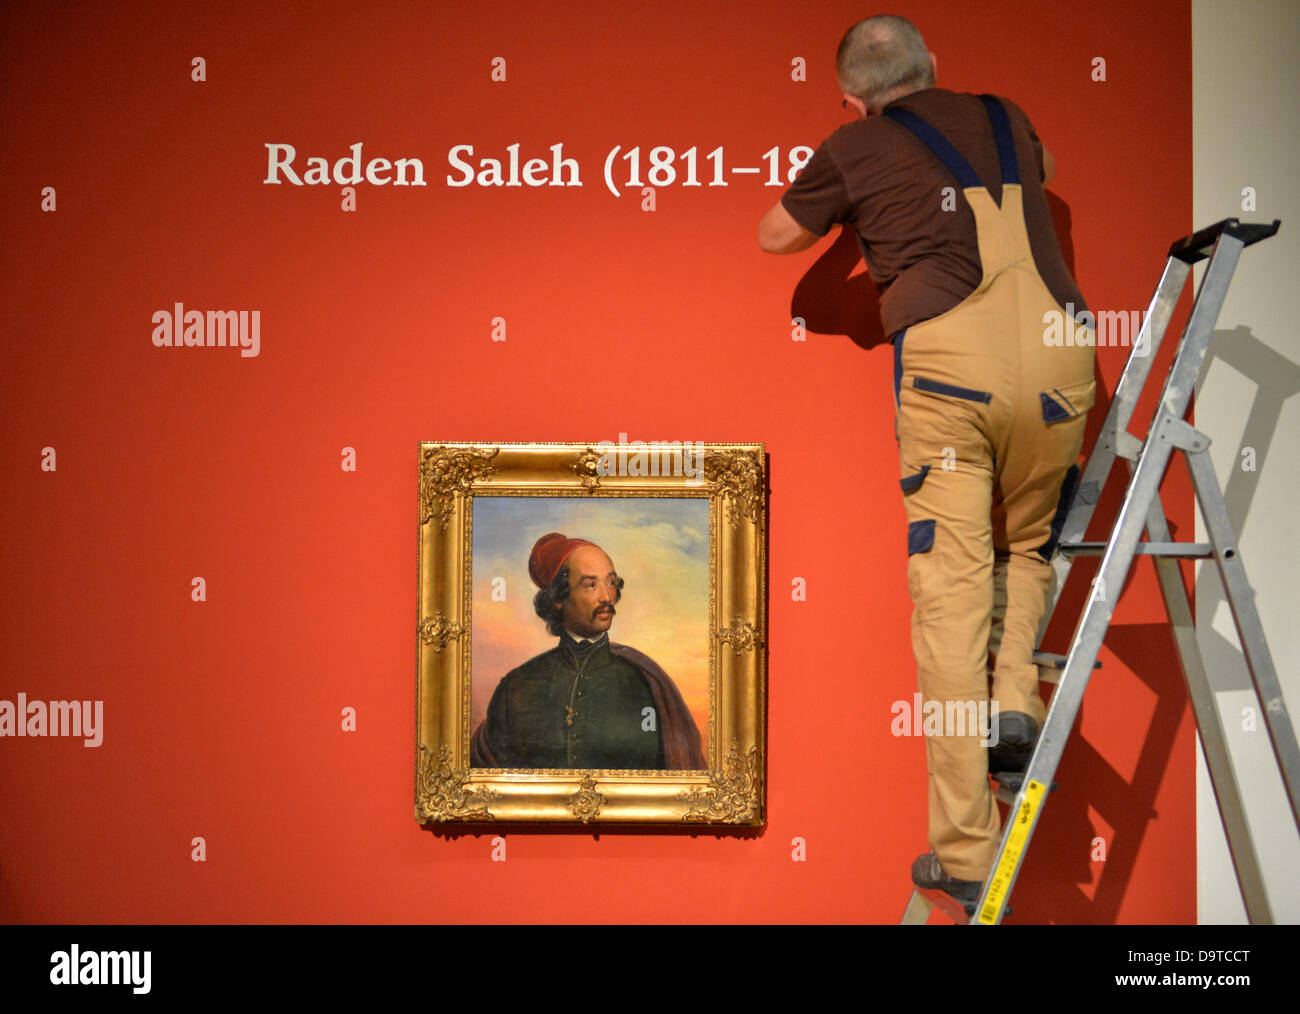 An employee of the Lindenau Museum works on a lettering above the portarit of painter Carl Christian Vogelstein (1848) by Raden Saleh at an exhibition on the Javanese painter in Altenburg, Germany, 26 June 2013. The exhibition will run from 29 June till 22 September 2013 and presents some of Saleh's paintings publicly for the first time. Photo: MARC TIRL Stock Photo